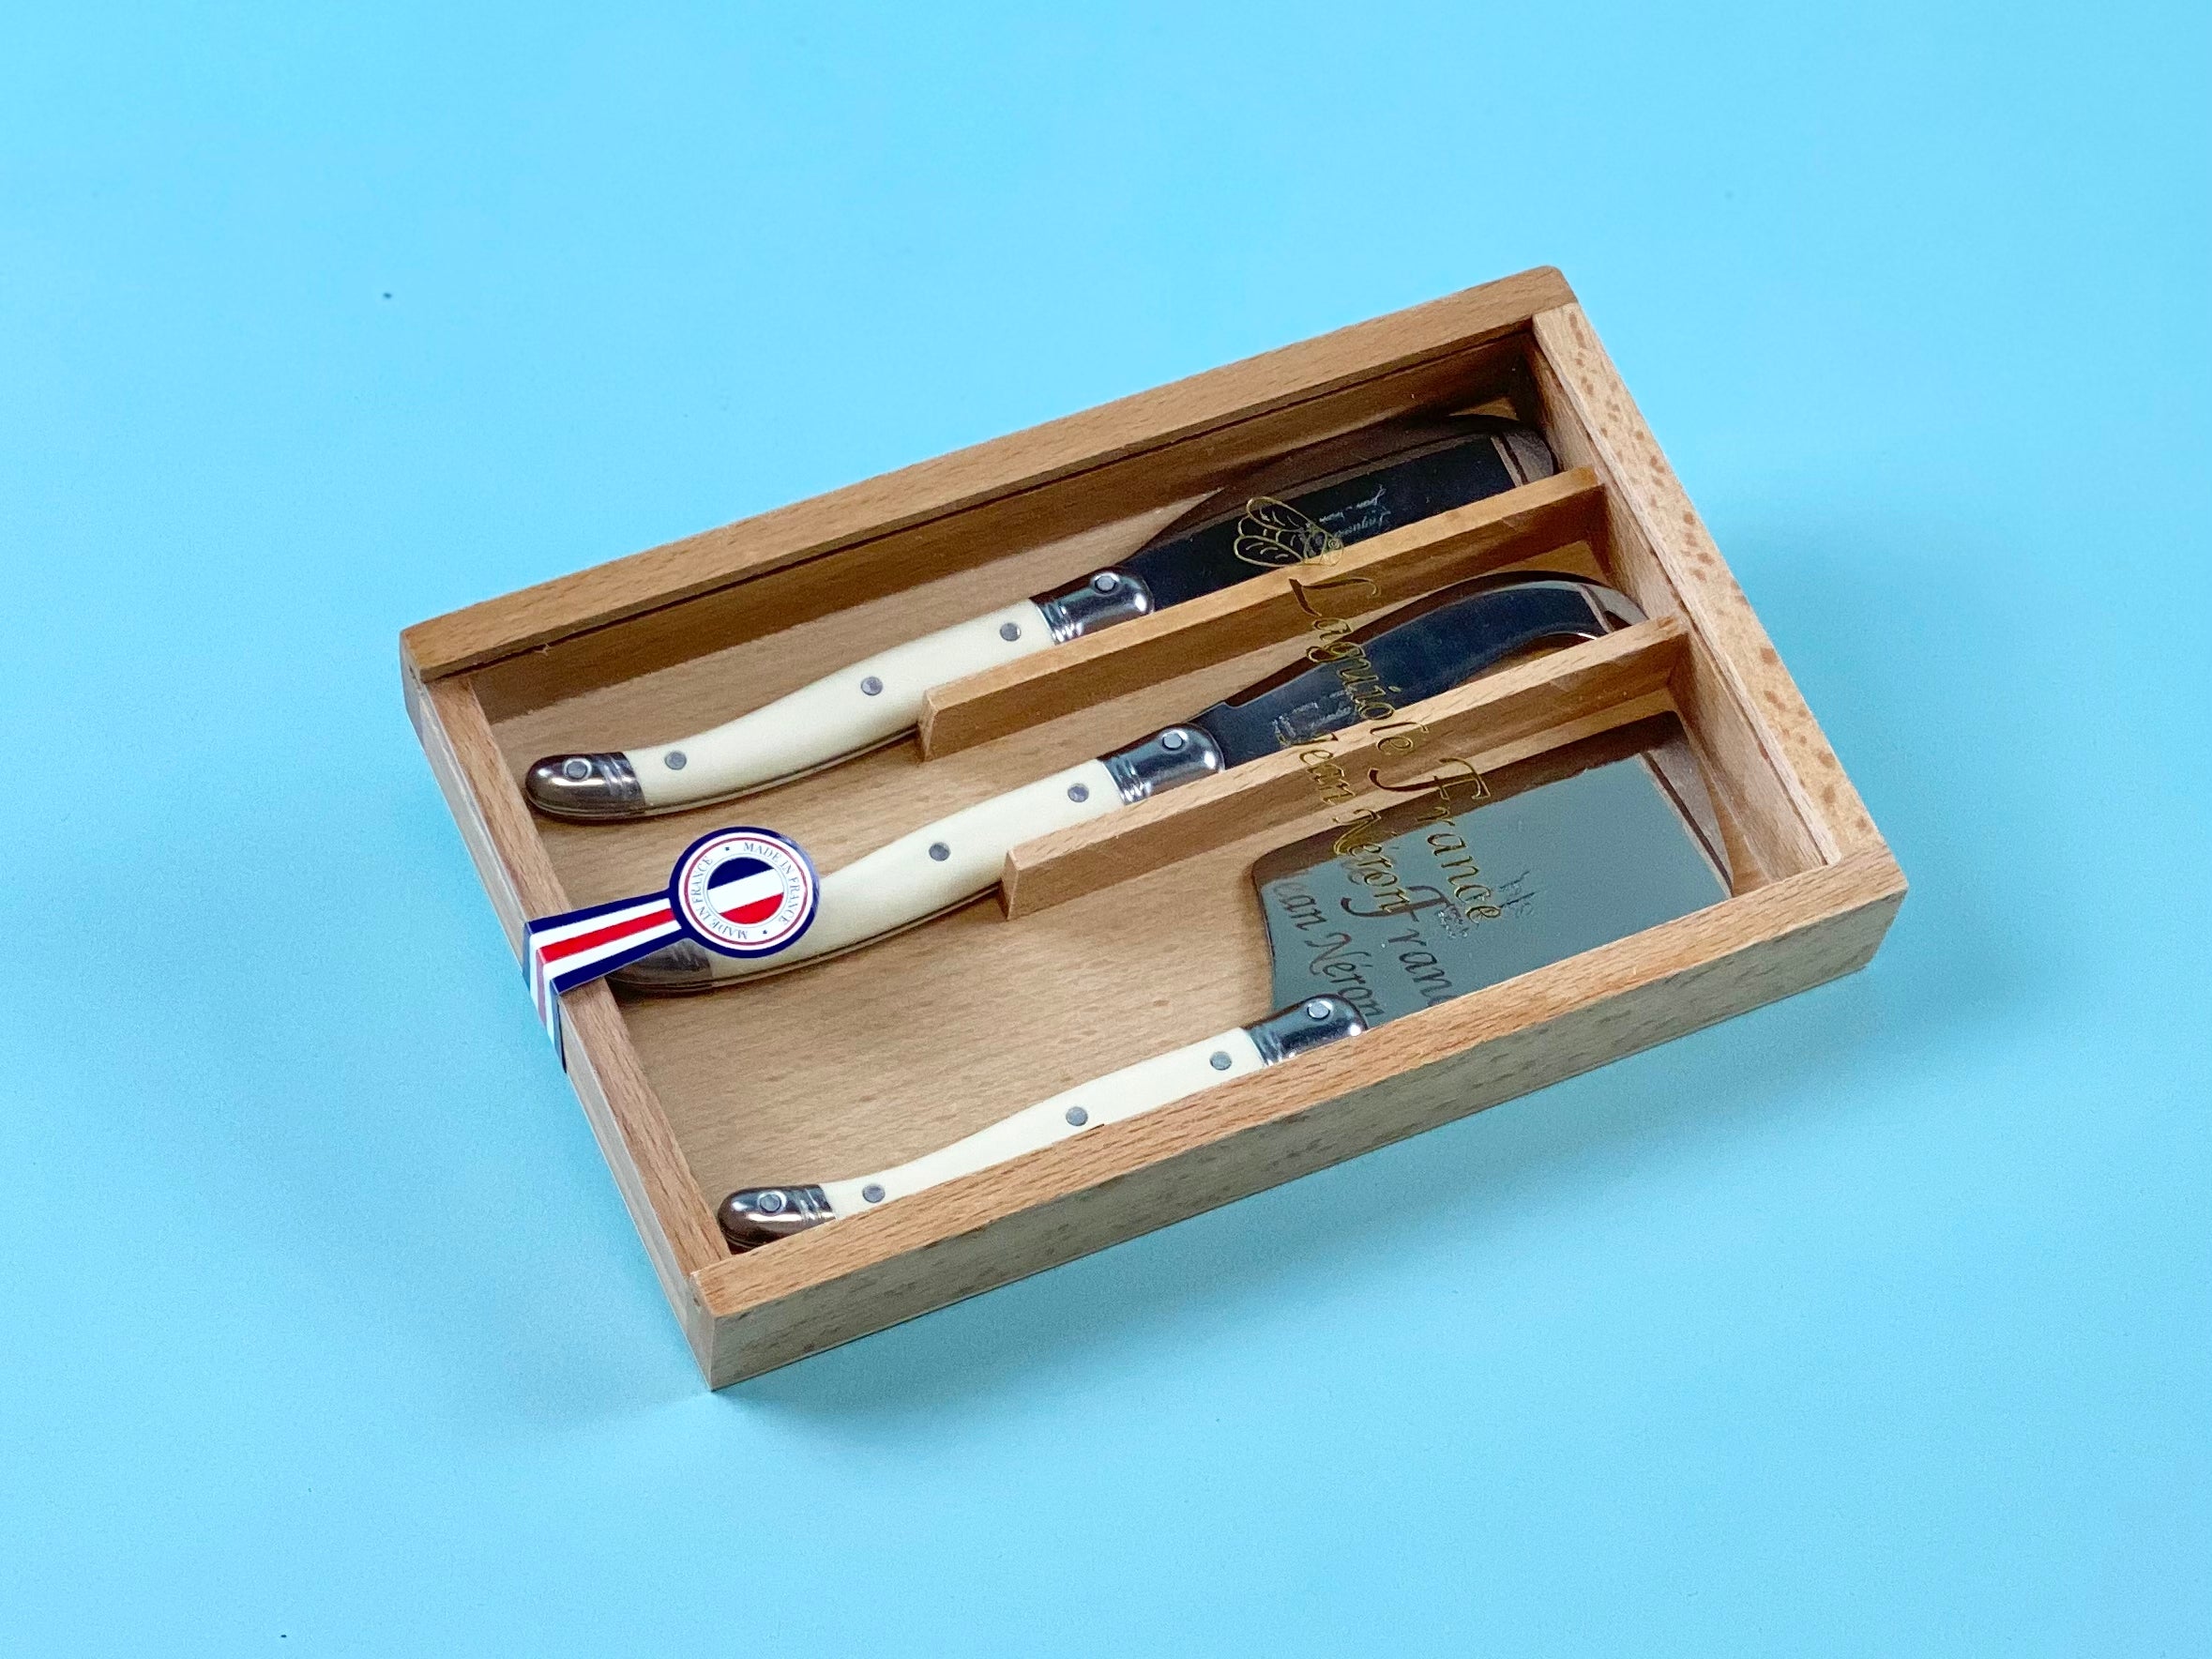 Laguiole Mini Ivory Cheese Set in Wooden Box with Acrylic Lid (Set of 3) Cutlery Set Laguiole Brand_Laguiole Cheese Sets Gift Sets Kitchen_Dinnerware Kitchen_Kitchenware Laguiole Loose Mini Rainbow Utensils Mini Cheese Sets 79003300I